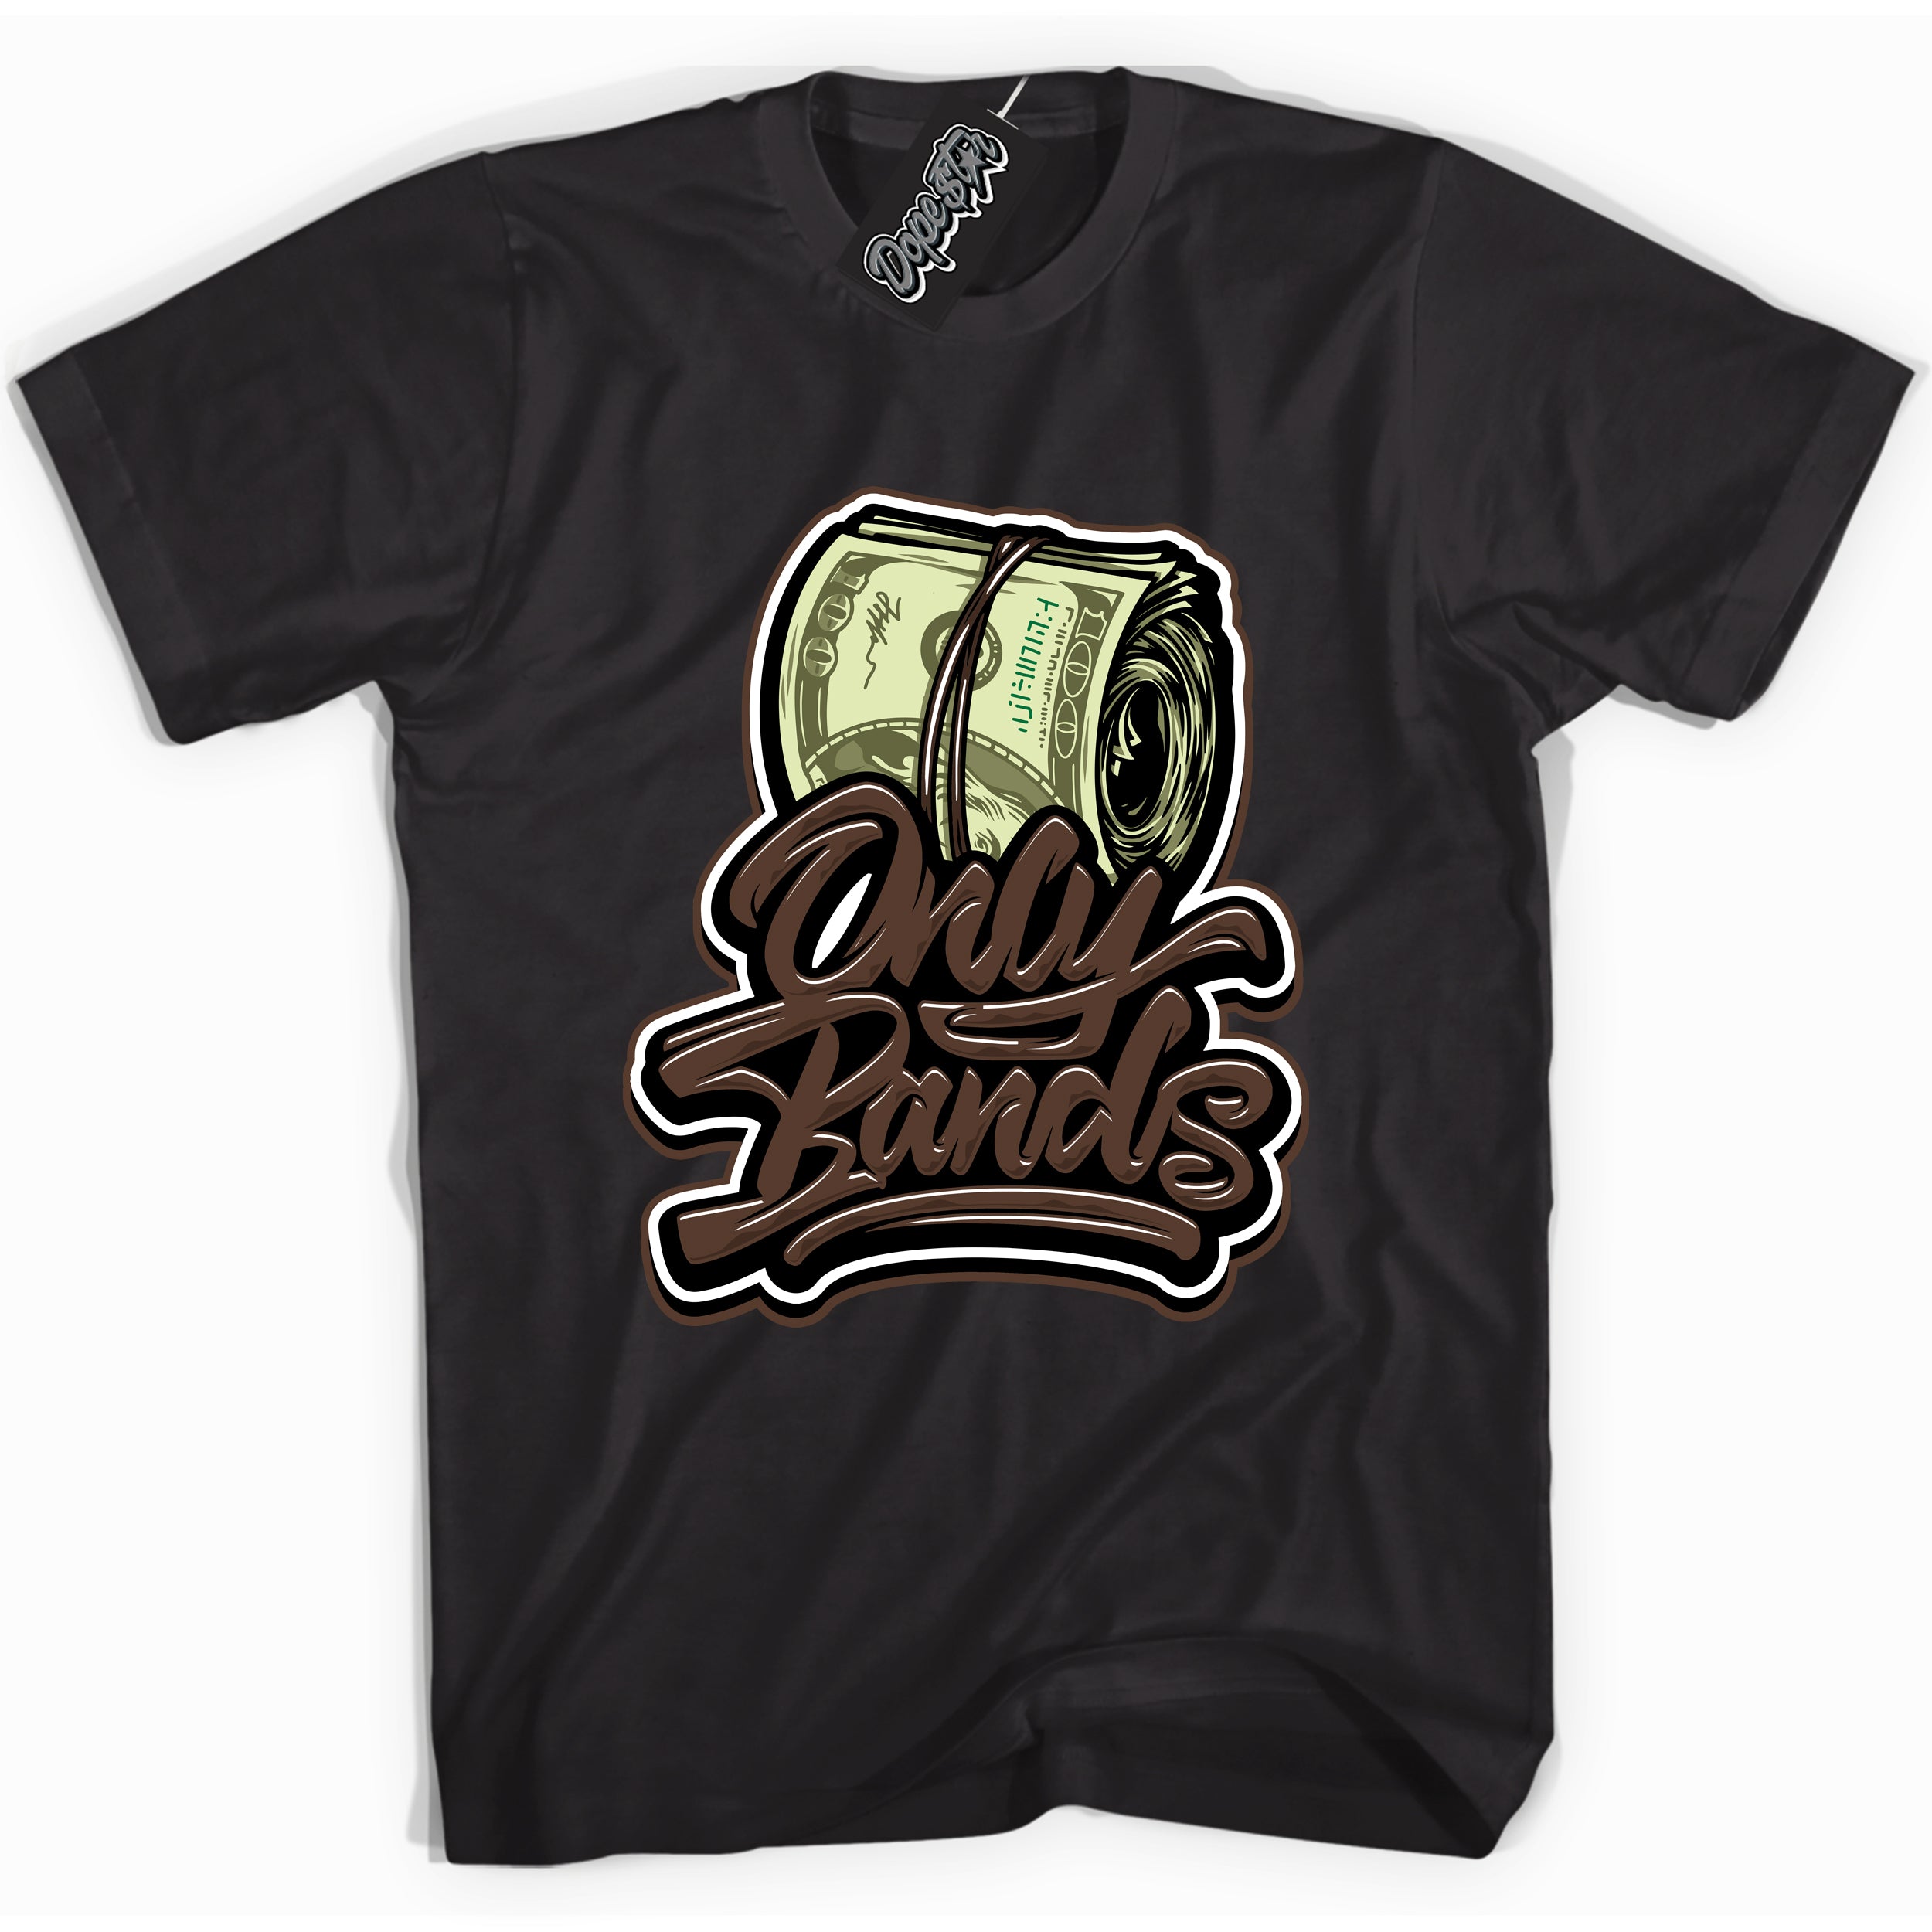 Cool Black graphic tee with “ Only Bands ” design, that perfectly matches Palomino 1s sneakers 